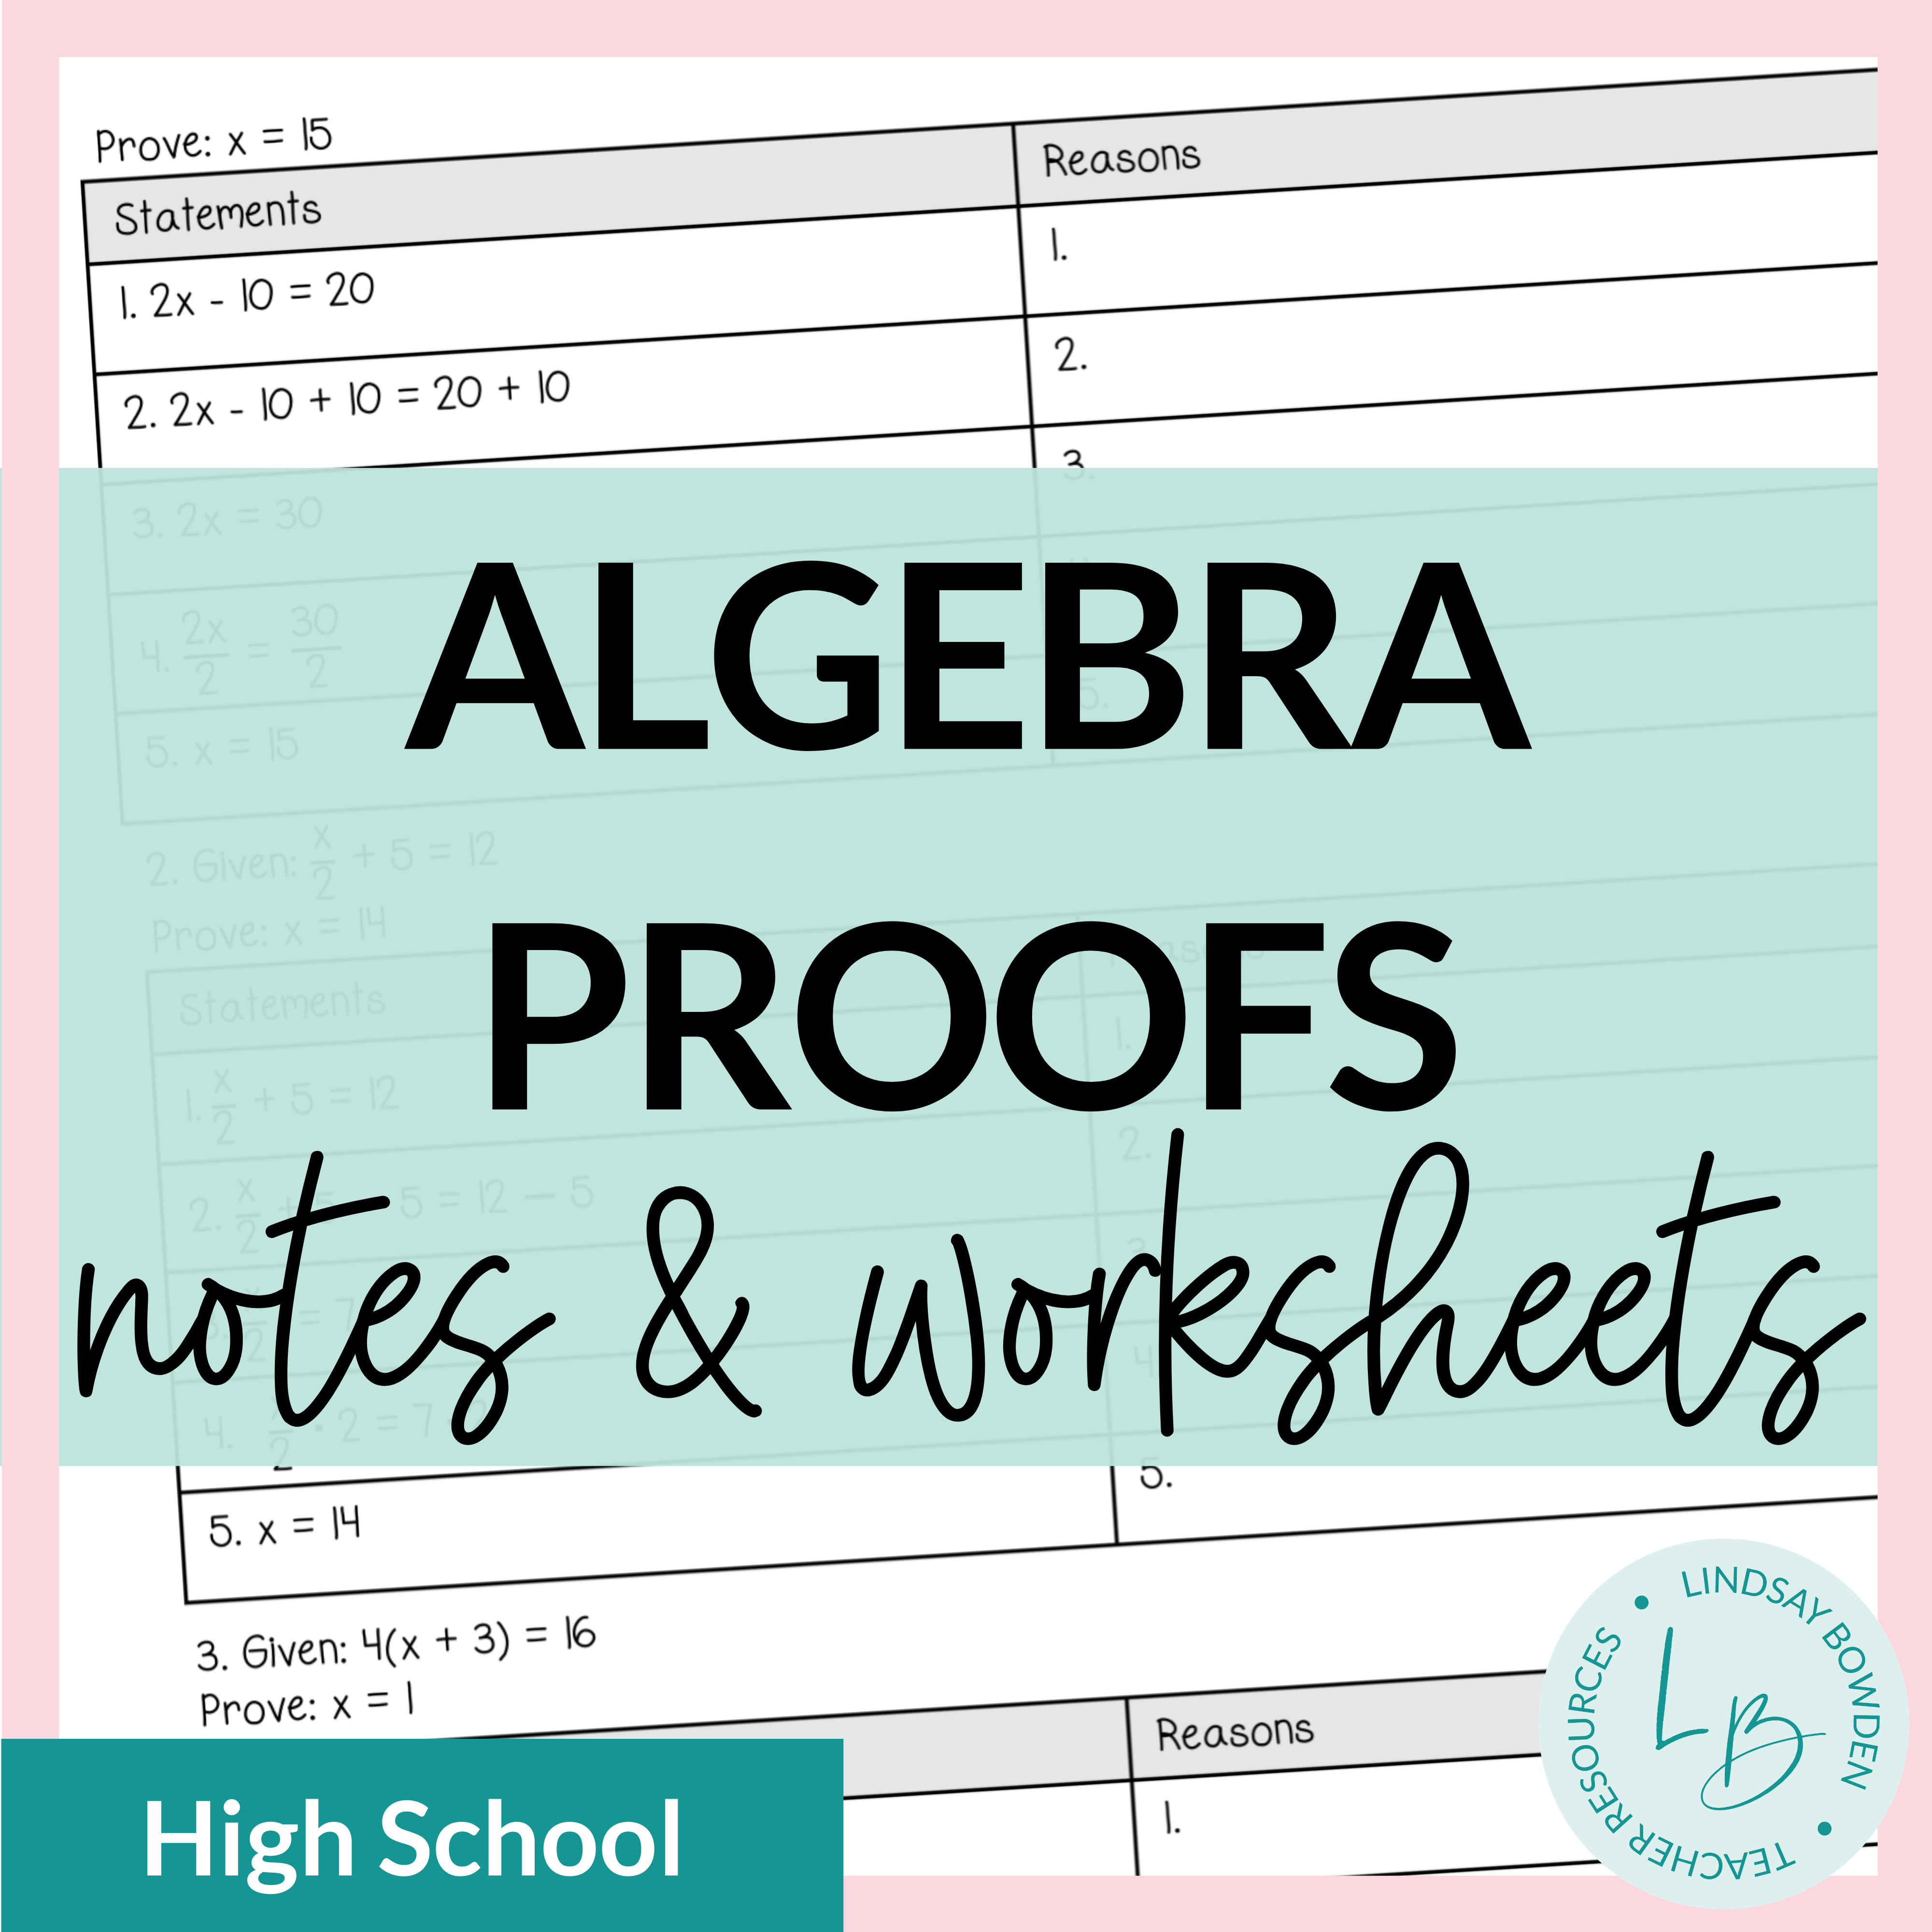 Algebra Proofs Notes and Worksheets - Lindsay Bowden In Algebraic Proofs Worksheet With Answers